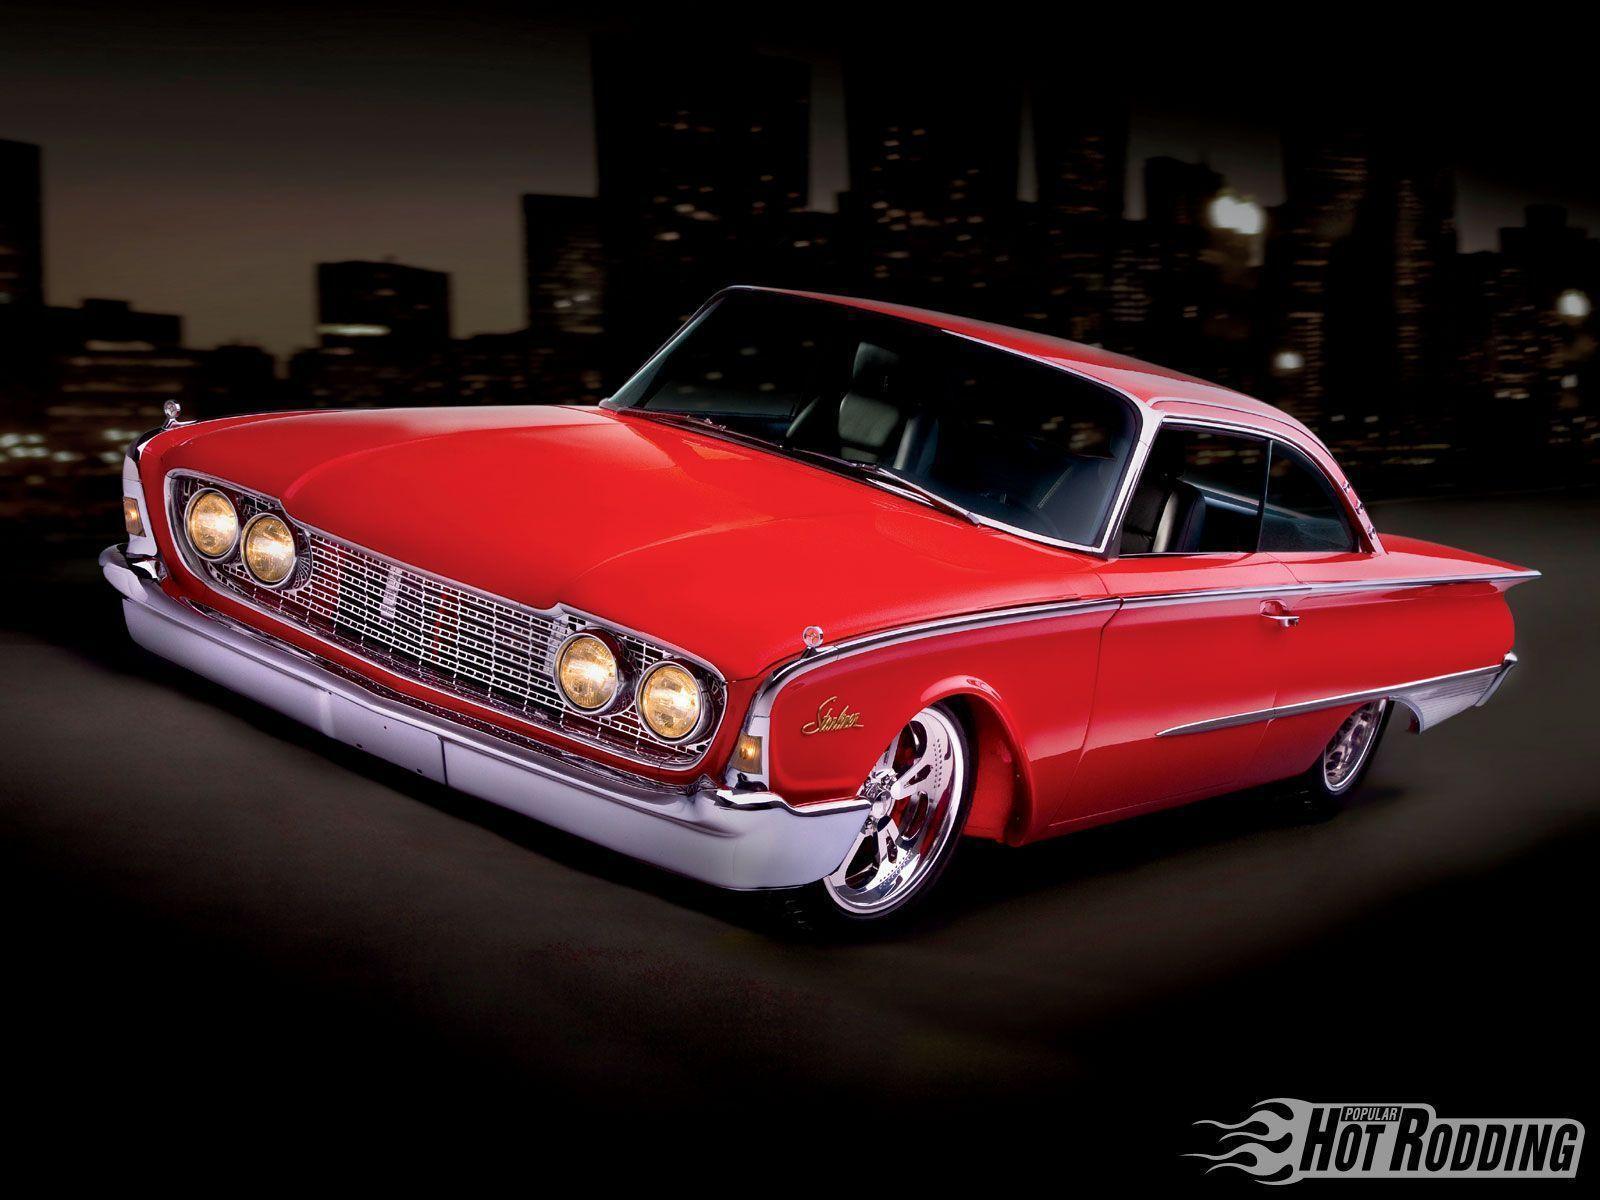 Ford Starliner luxury classic hot rod lowrider wallpaper